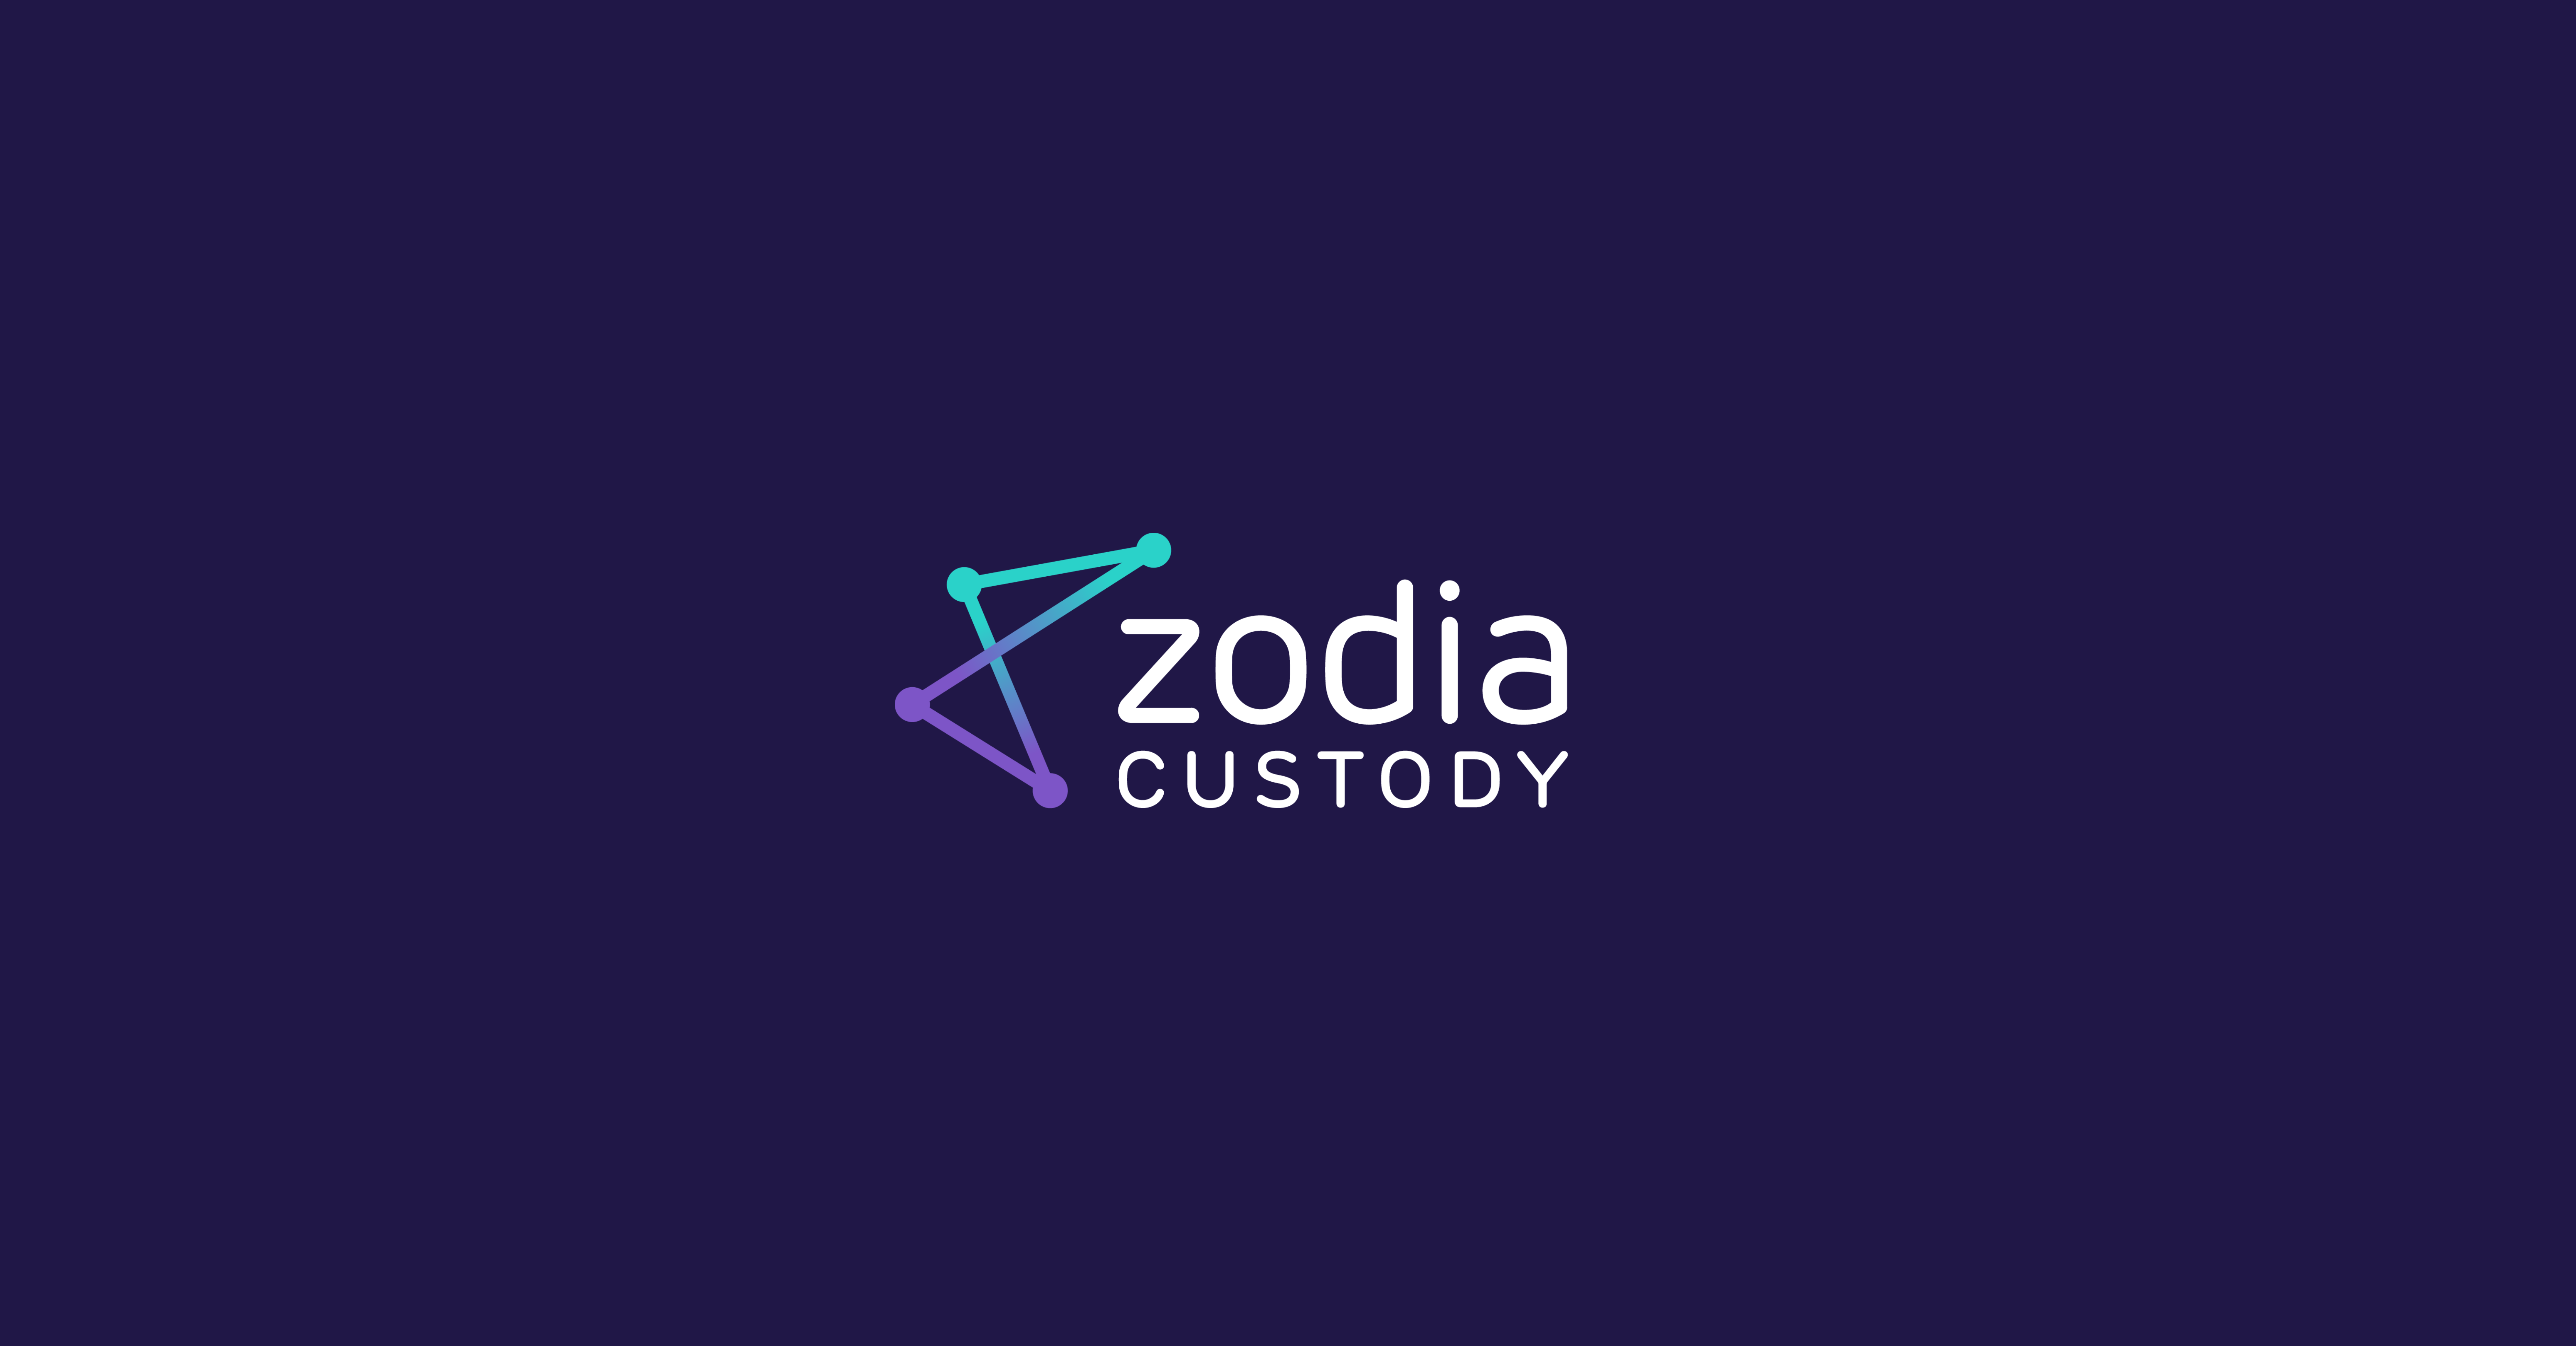 Zodia Custody expands custody services to Governments and Law Enforcement  